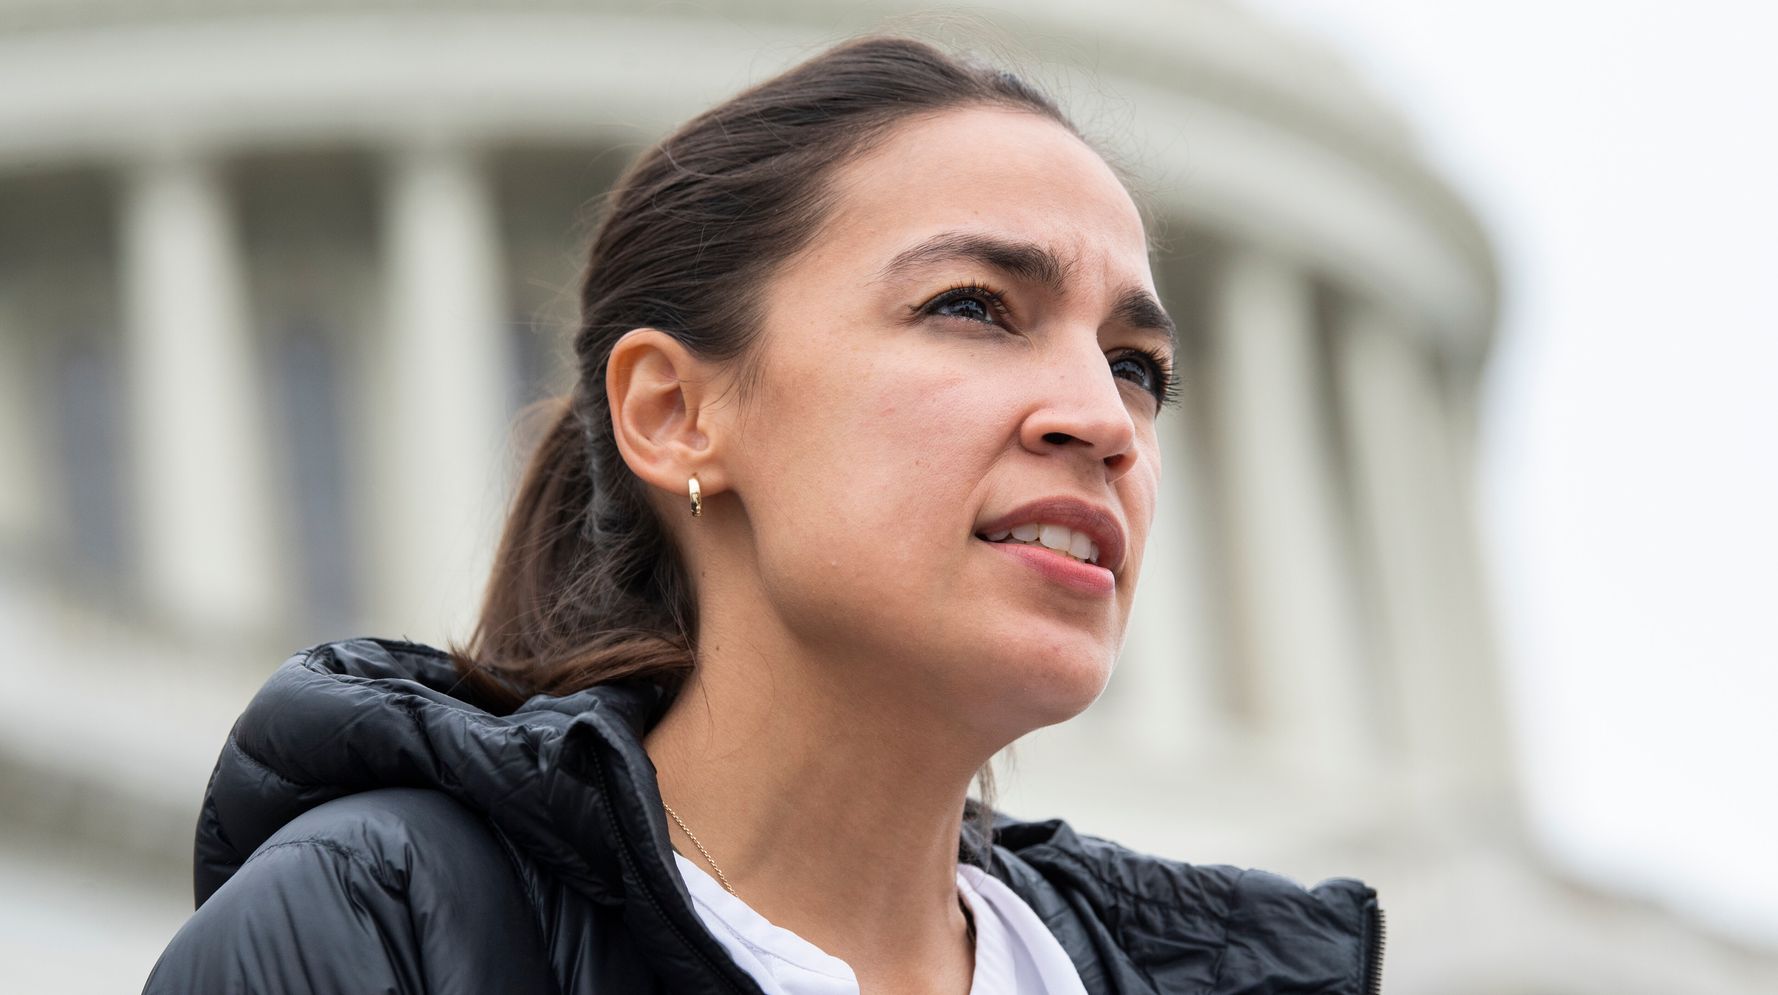 Rep. Alexandria Ocasio-Cortez Says She Feared Being Sexually Assaulted On Jan. 6